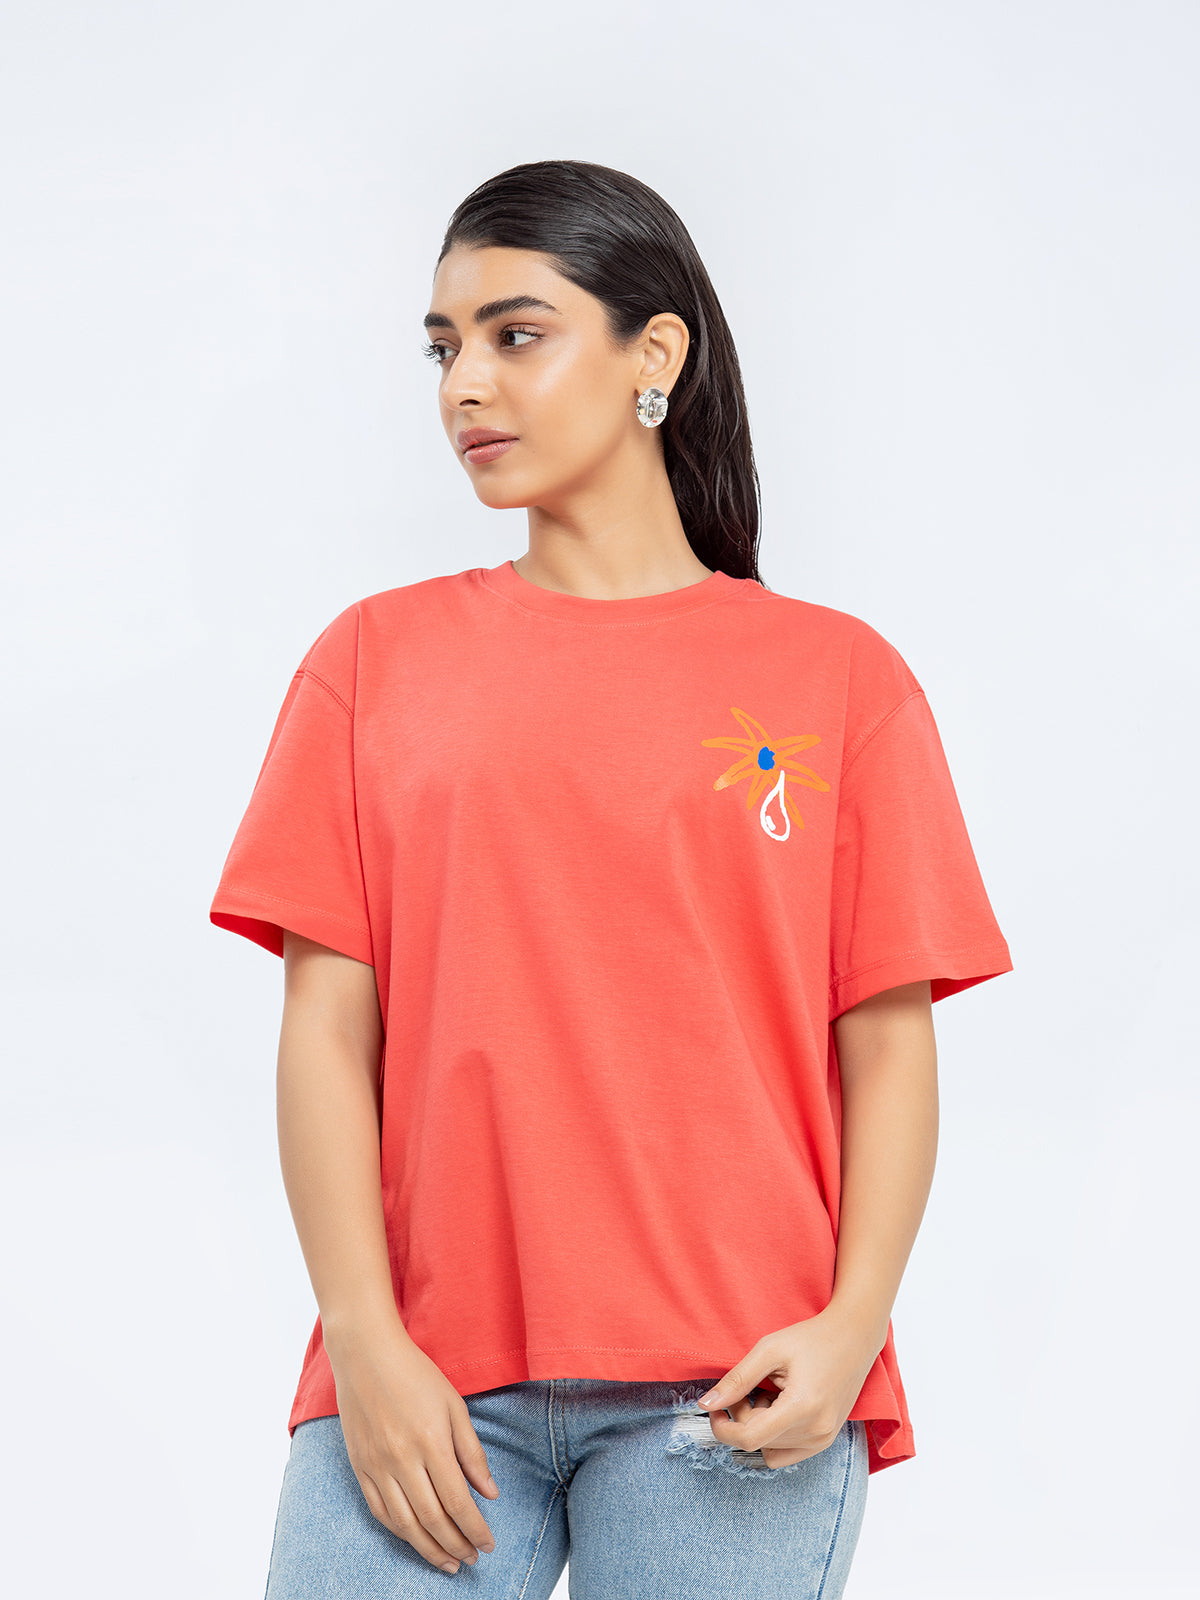 Relaxed Fit Graphic Tee - FWTGT24-019